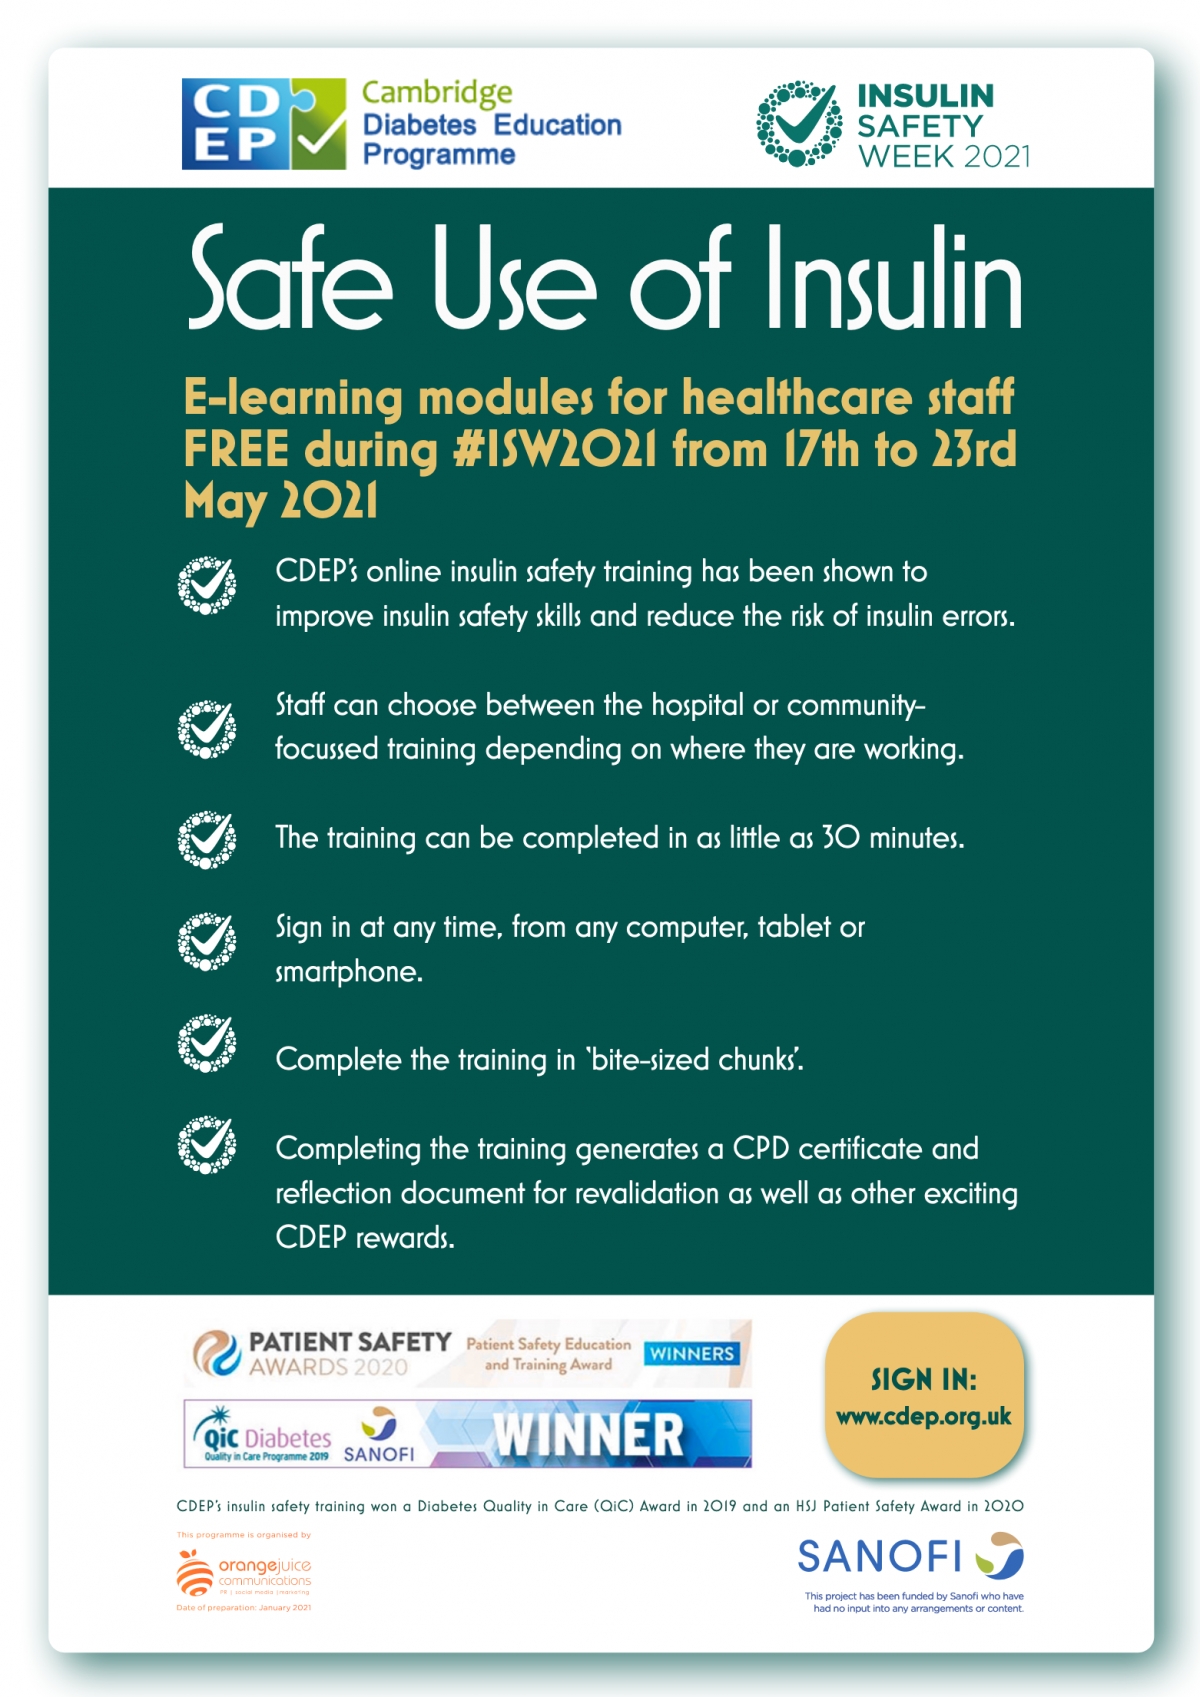 Insulin Safety Week: 17th - 23rd May 2021